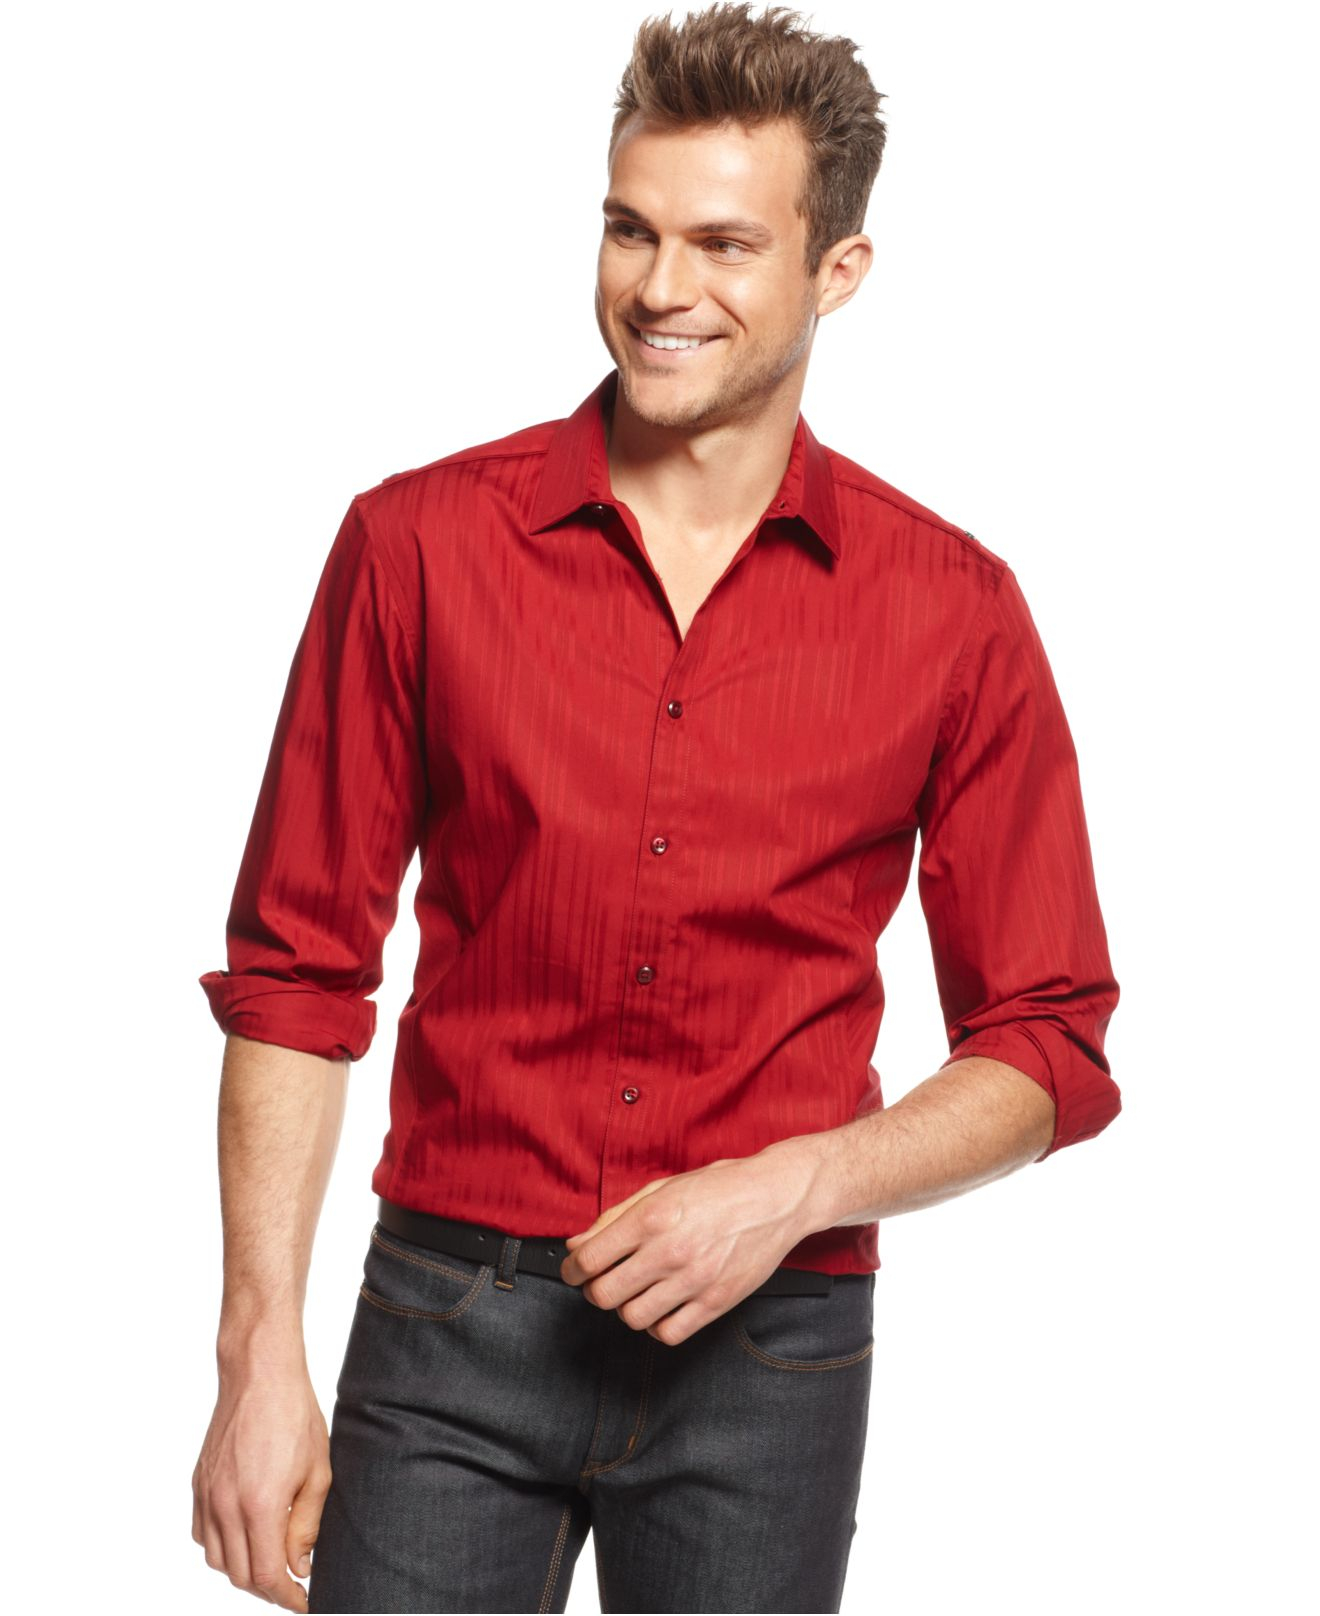 Lyst - Inc International Concepts Striped Harold Shirt in Red for Men